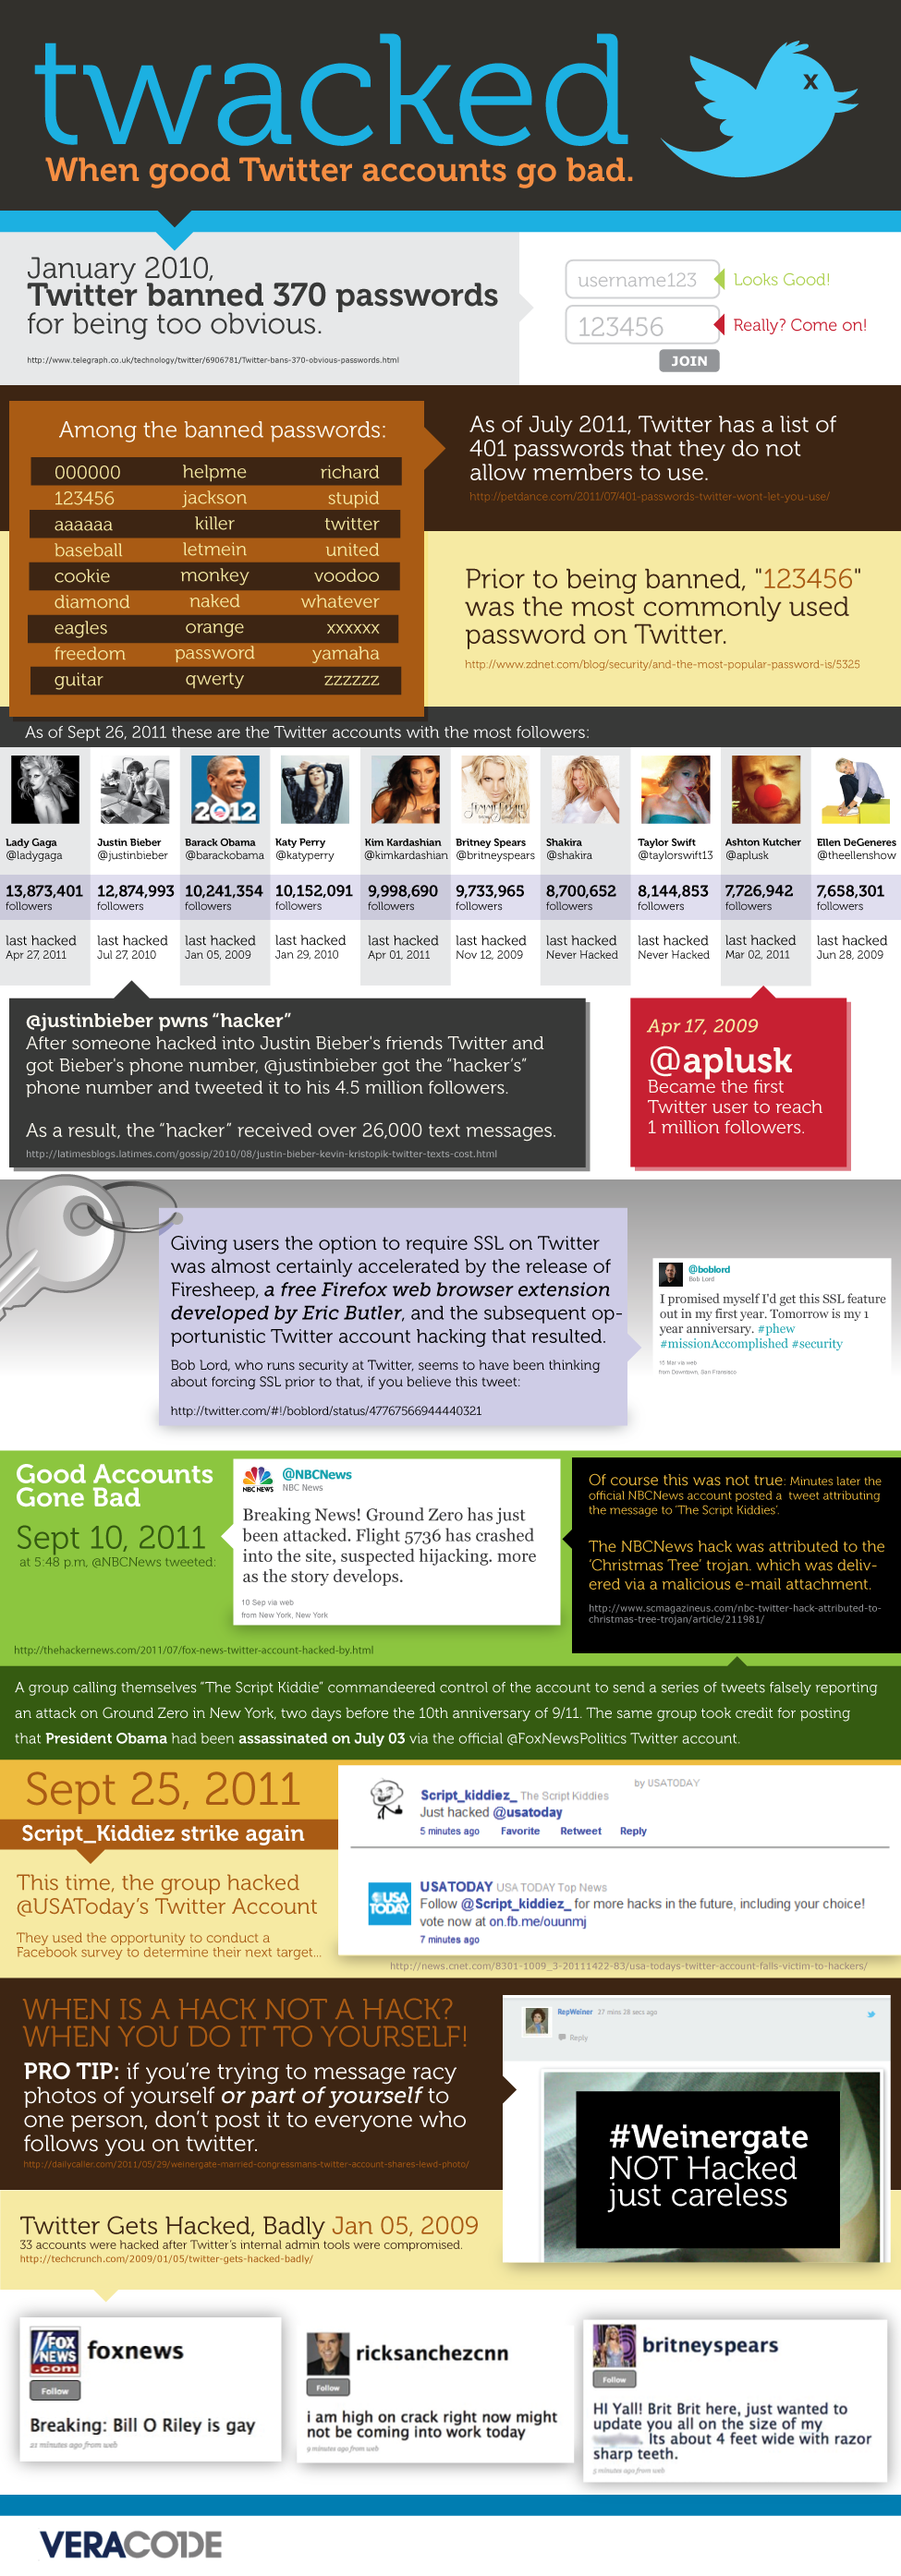 Twitter | Hackers σε accounts διασήμων(infographic)